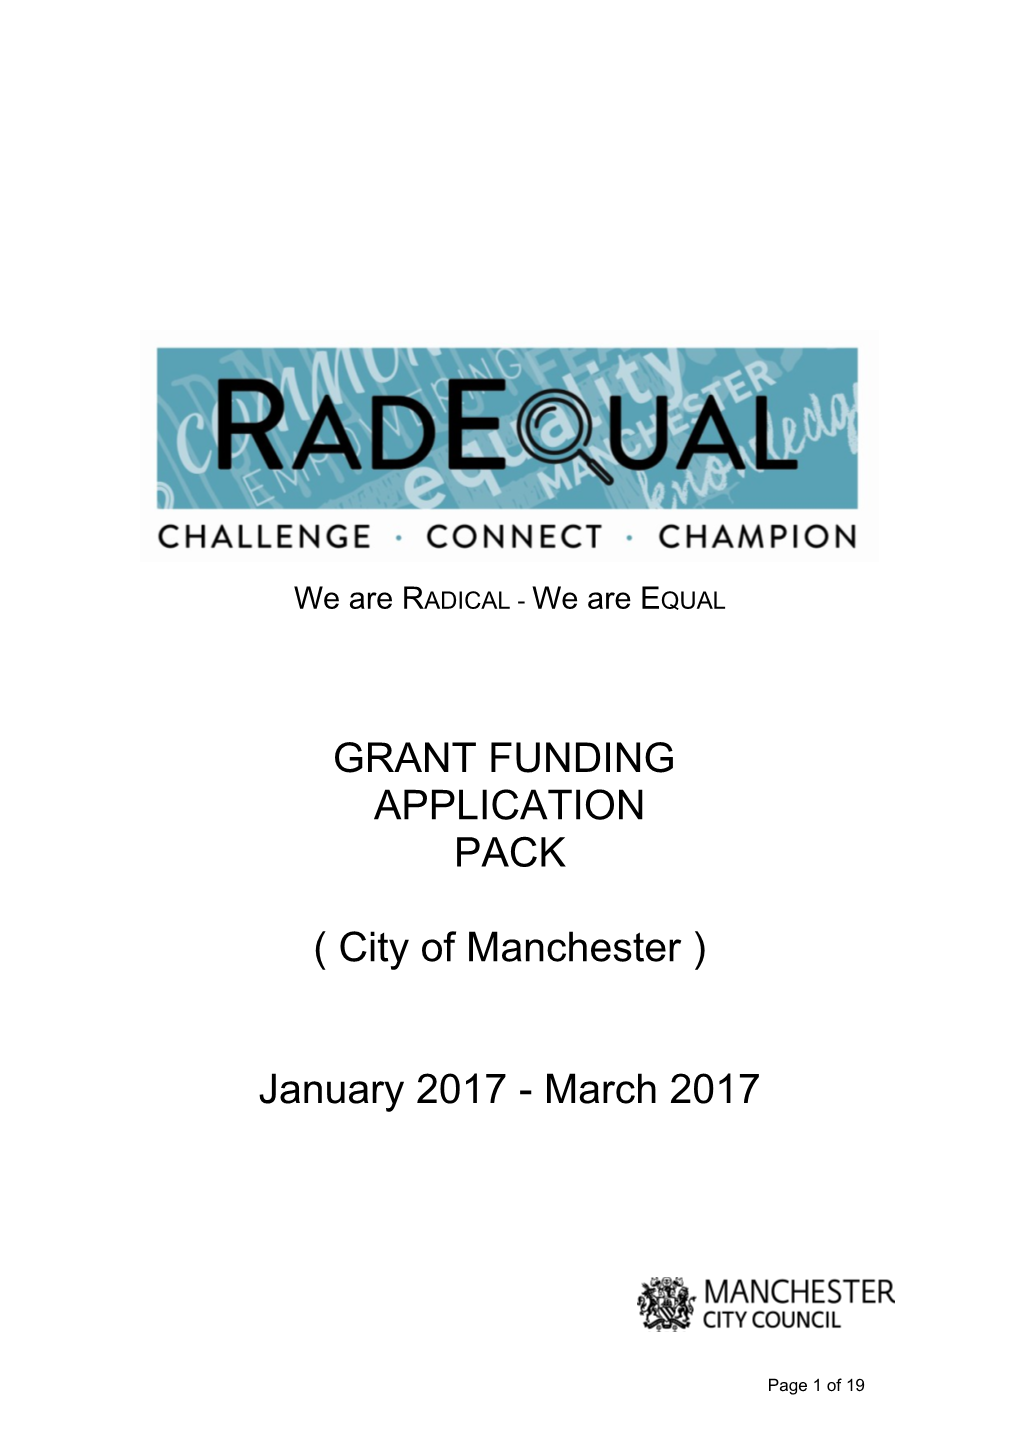 Manchester City Council Has Developed the Radequal Campaign That Has the Following Three